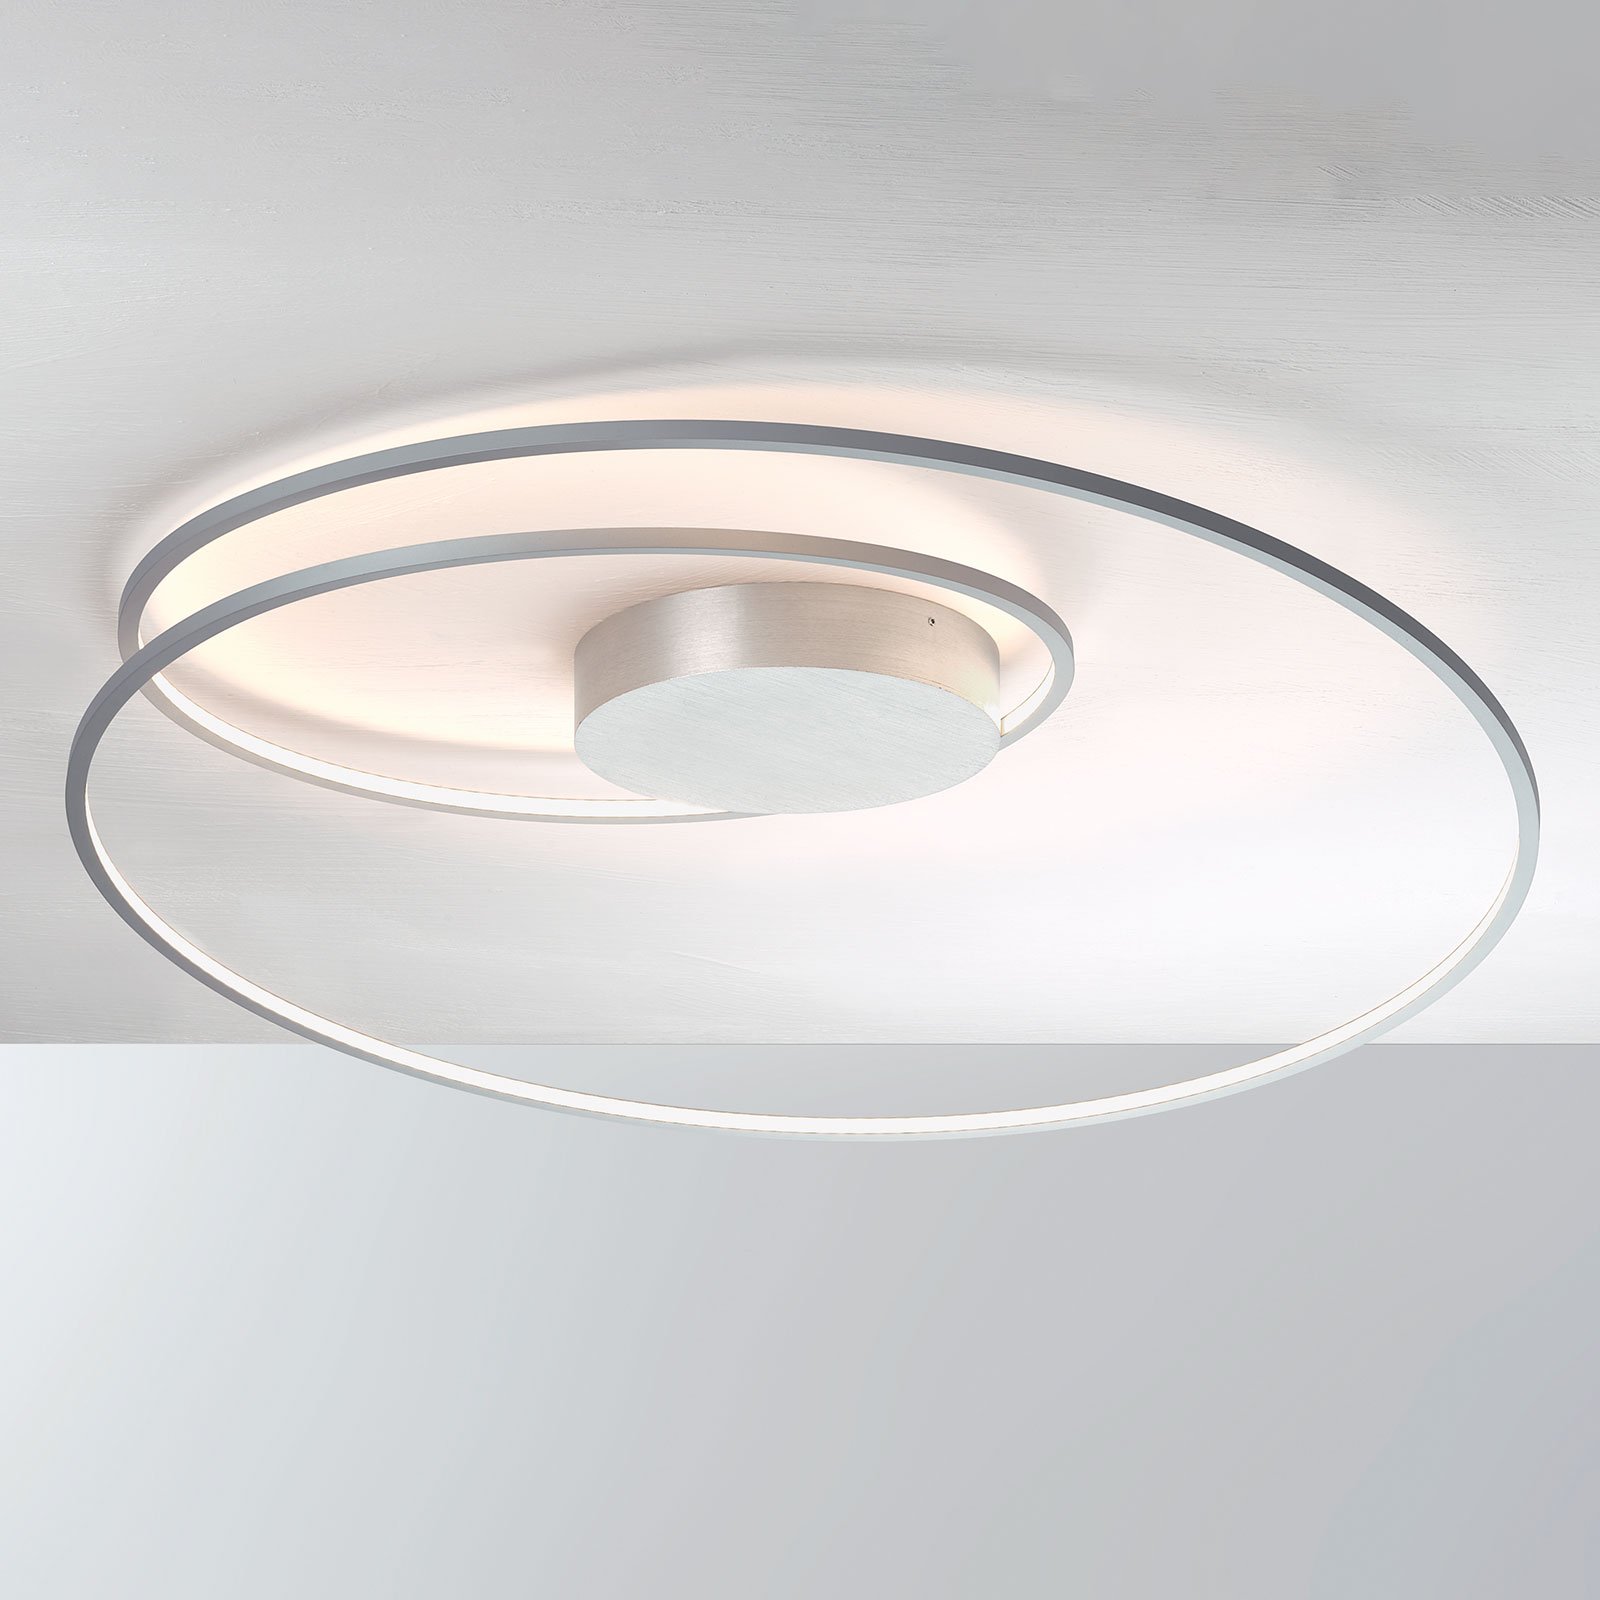 At - a powerful LED ceiling light